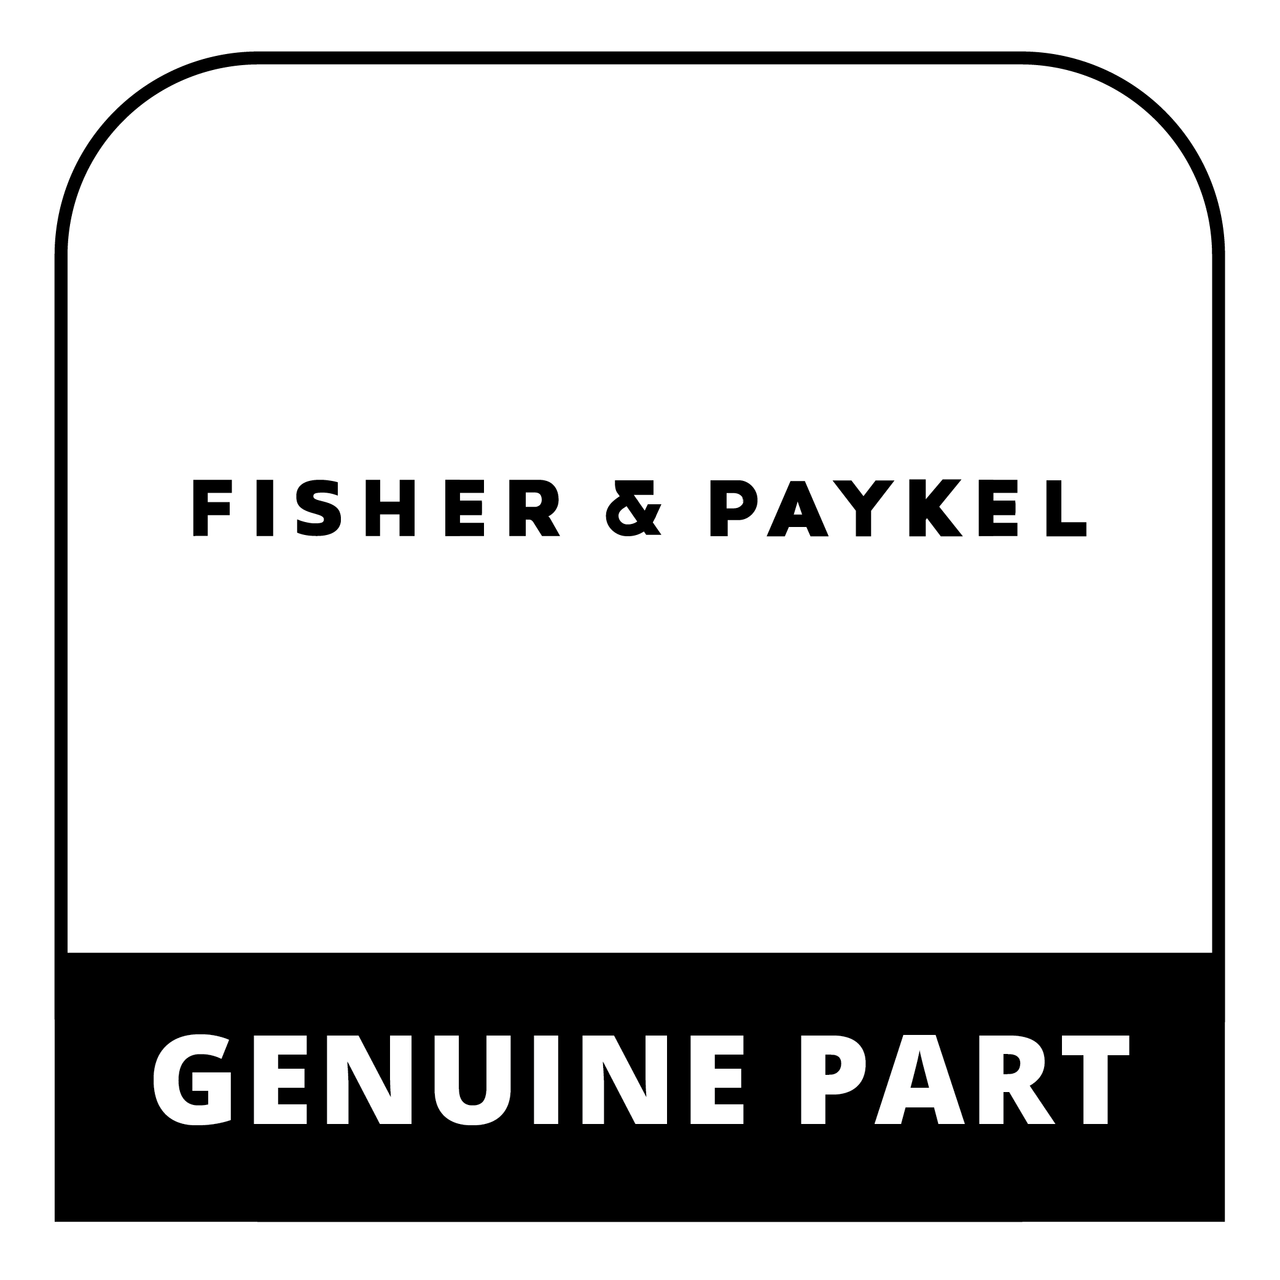 Fisher & Paykel 12825101P - Motor Condenser Fan 115V 3.4W - Genuine Fisher & Paykel (DCS) Part